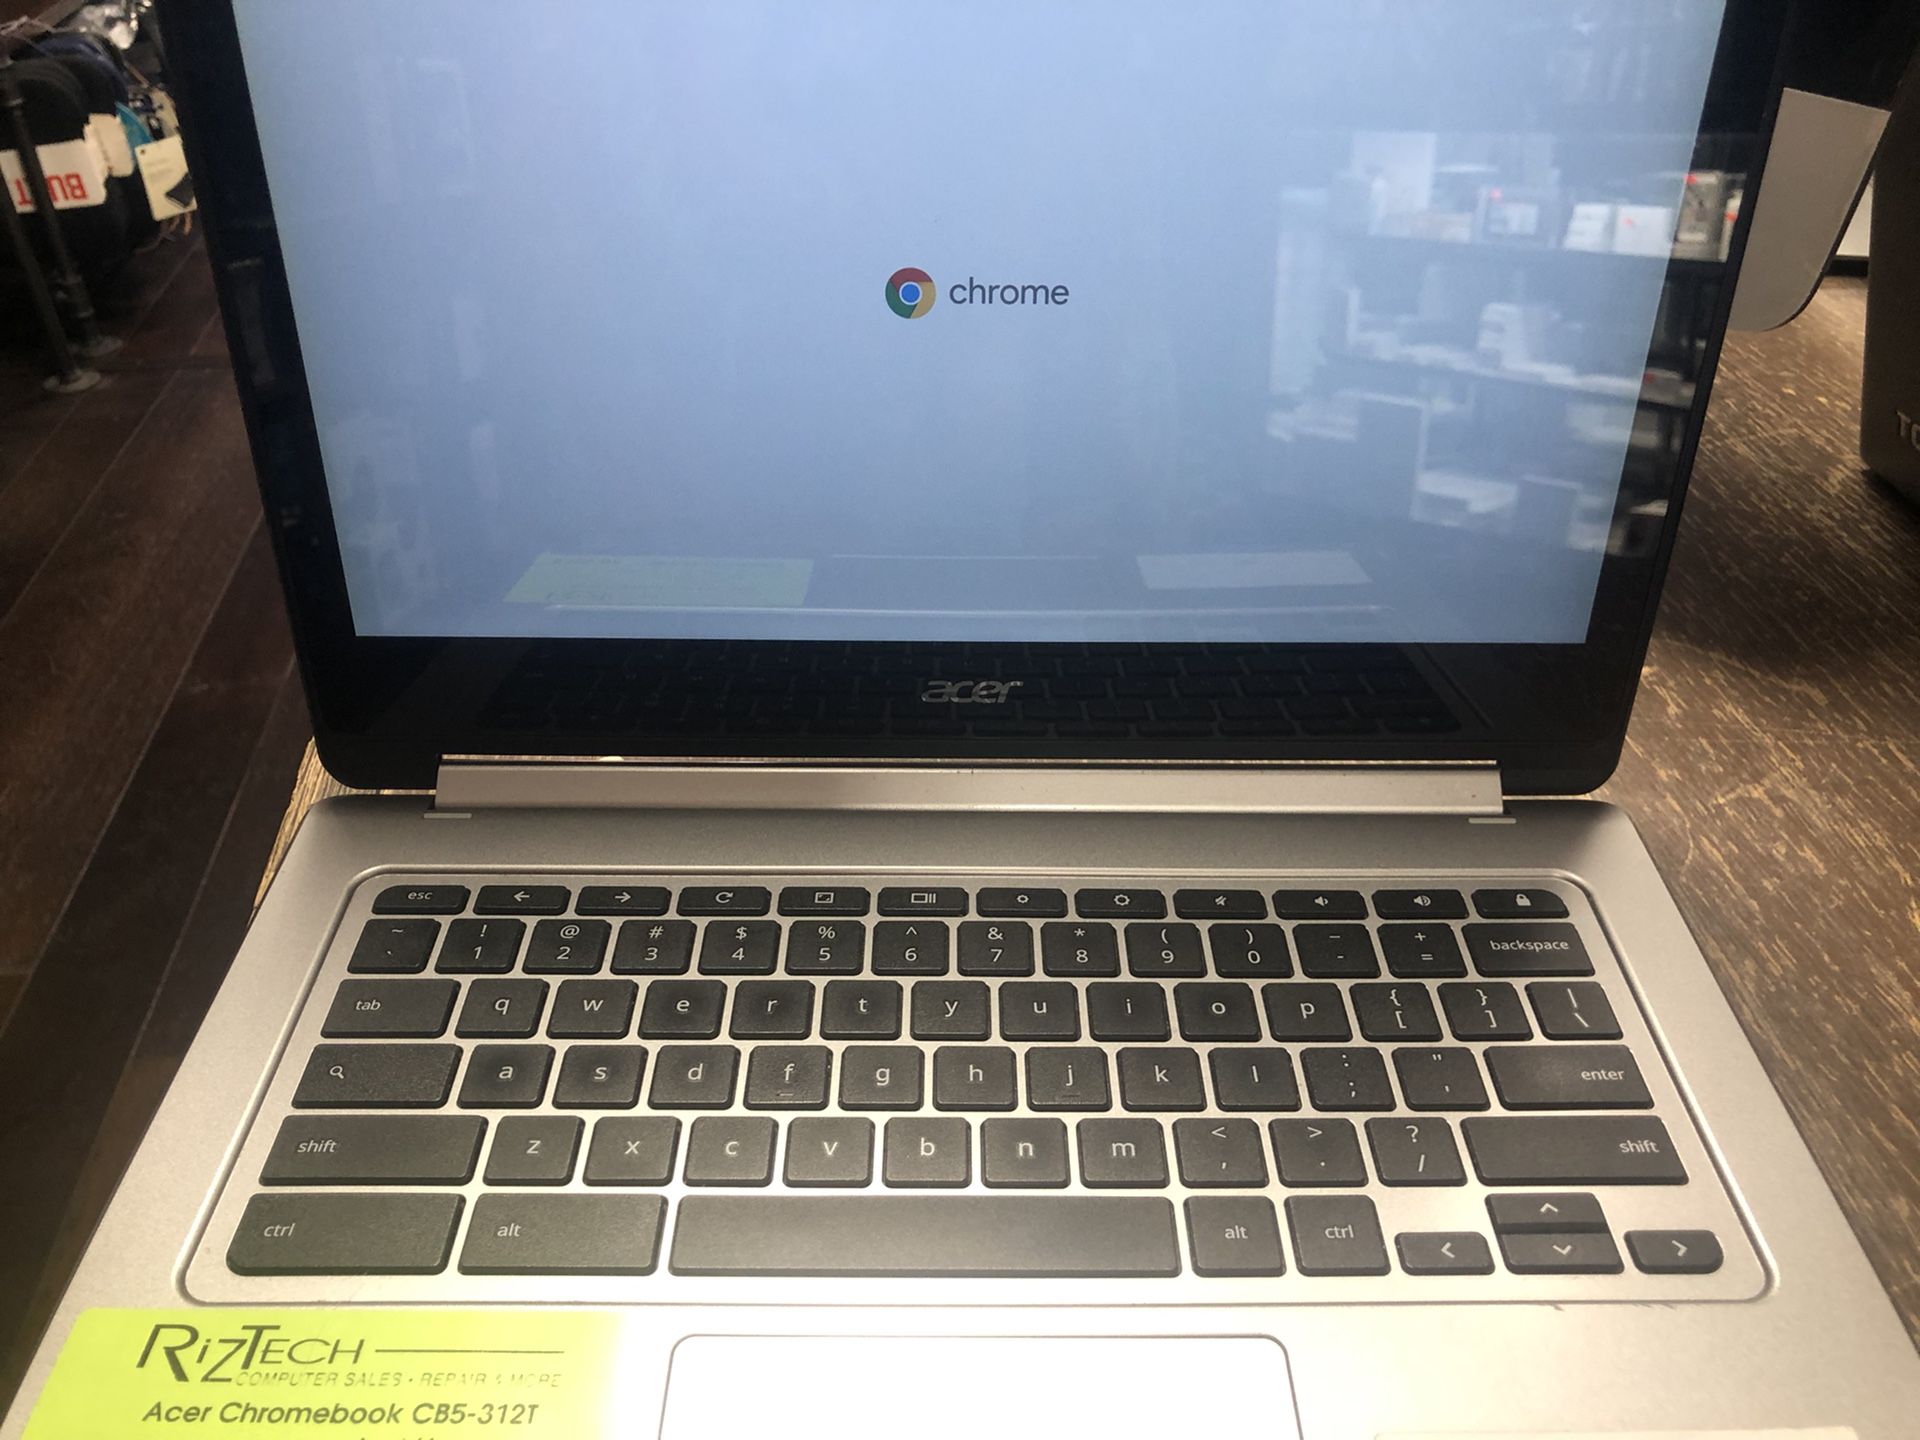 ACER Chromebook CB5-312T R13 Touchscreen Chromebook that folds in half to be a tablet